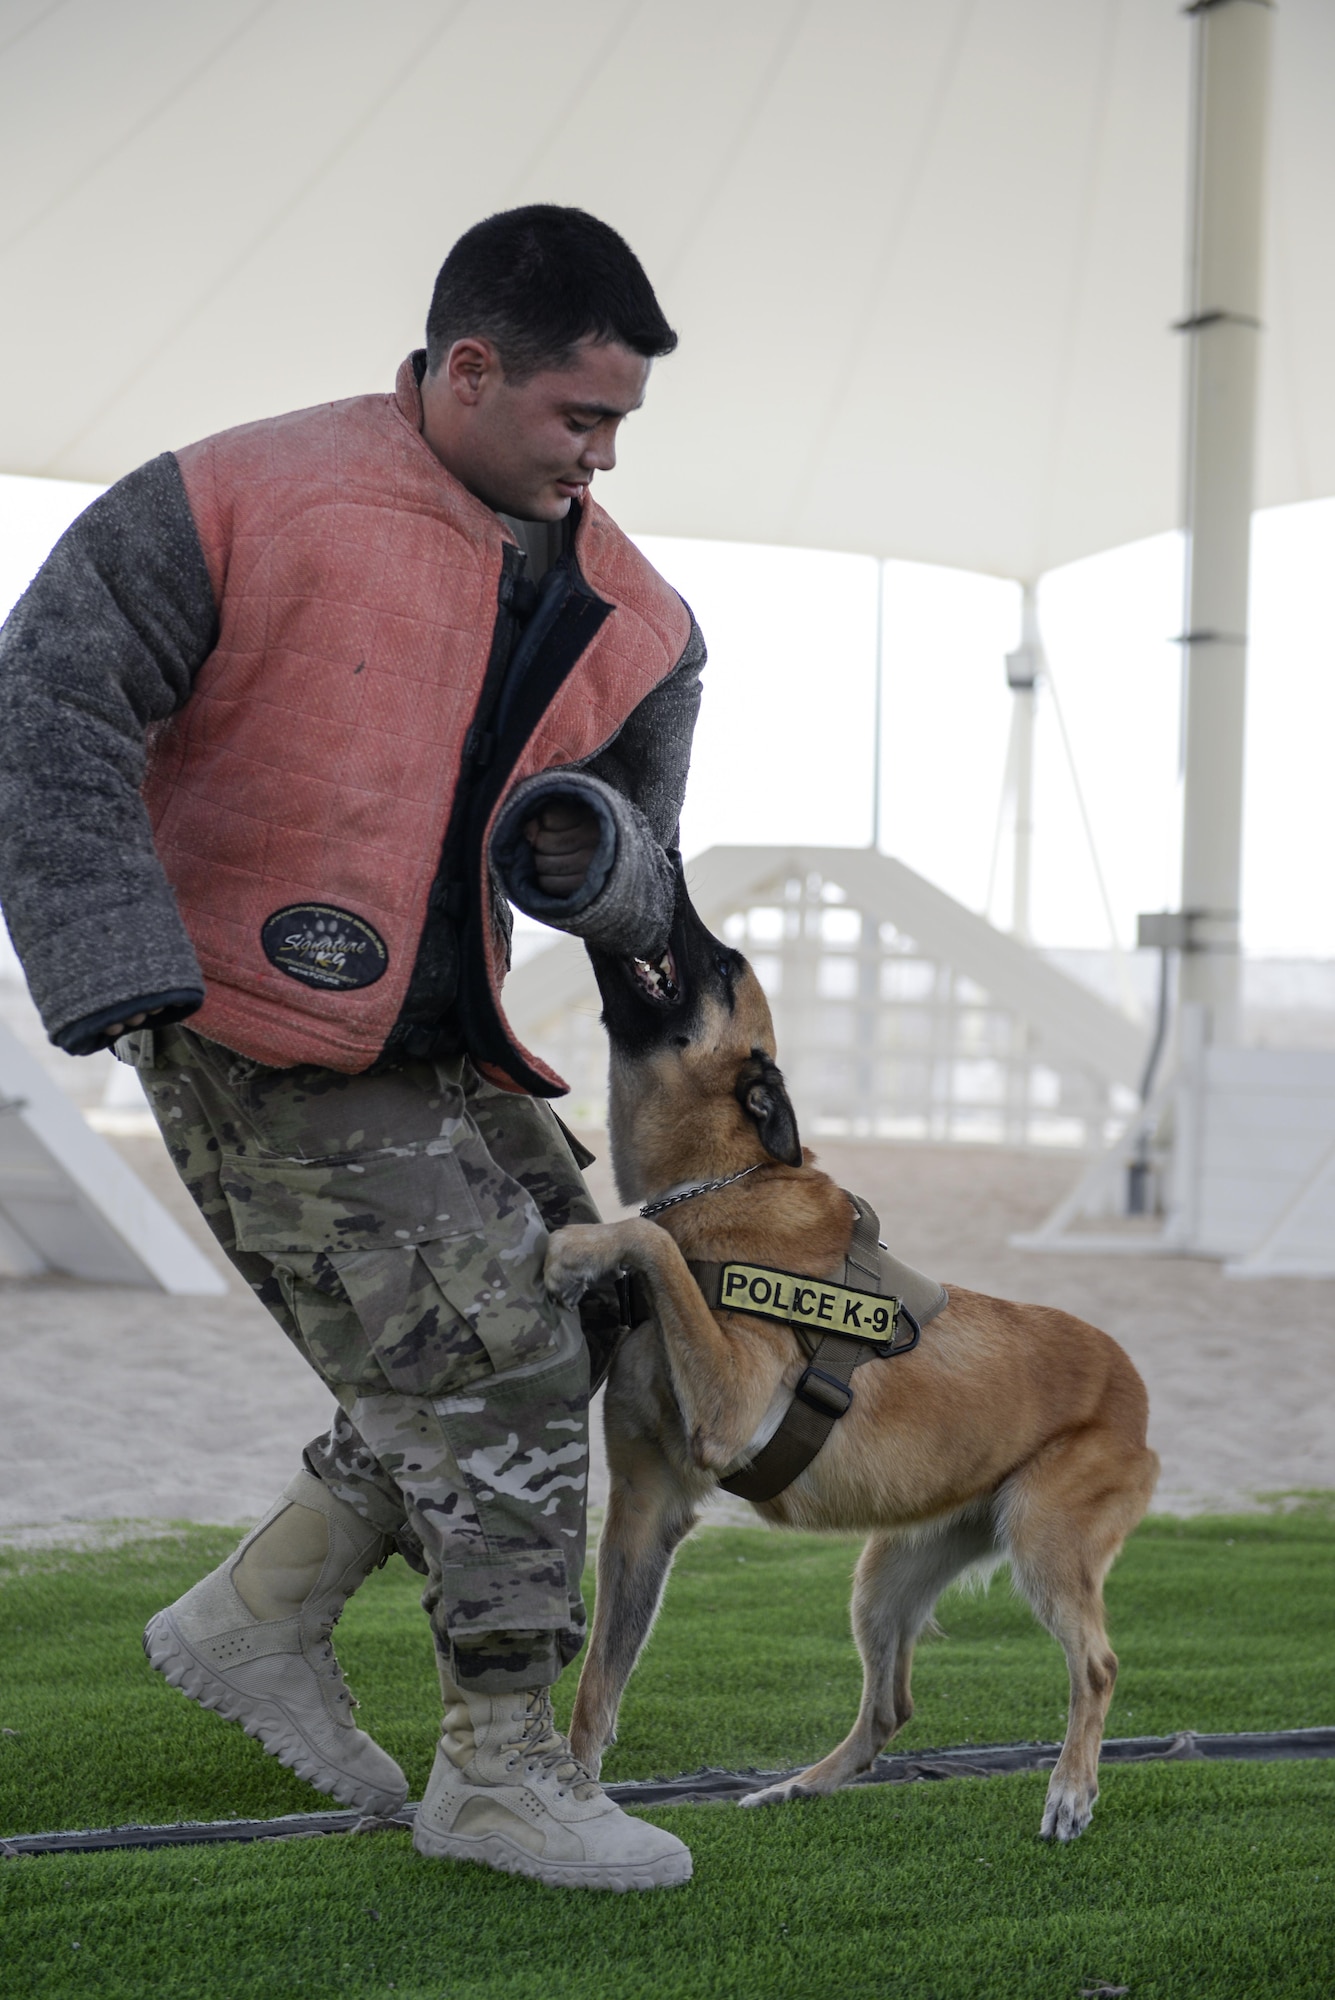 U.S. Air Force Staff Sgt. Matthew Ratchford, military working dog handler assigned to the 379th Expeditionary Security Forces Squadron, is detained by military working dog Oopey, during a K-9 demonstration exercise at Al Udeid Air Base, Qatar, Aug. 17, 2017.